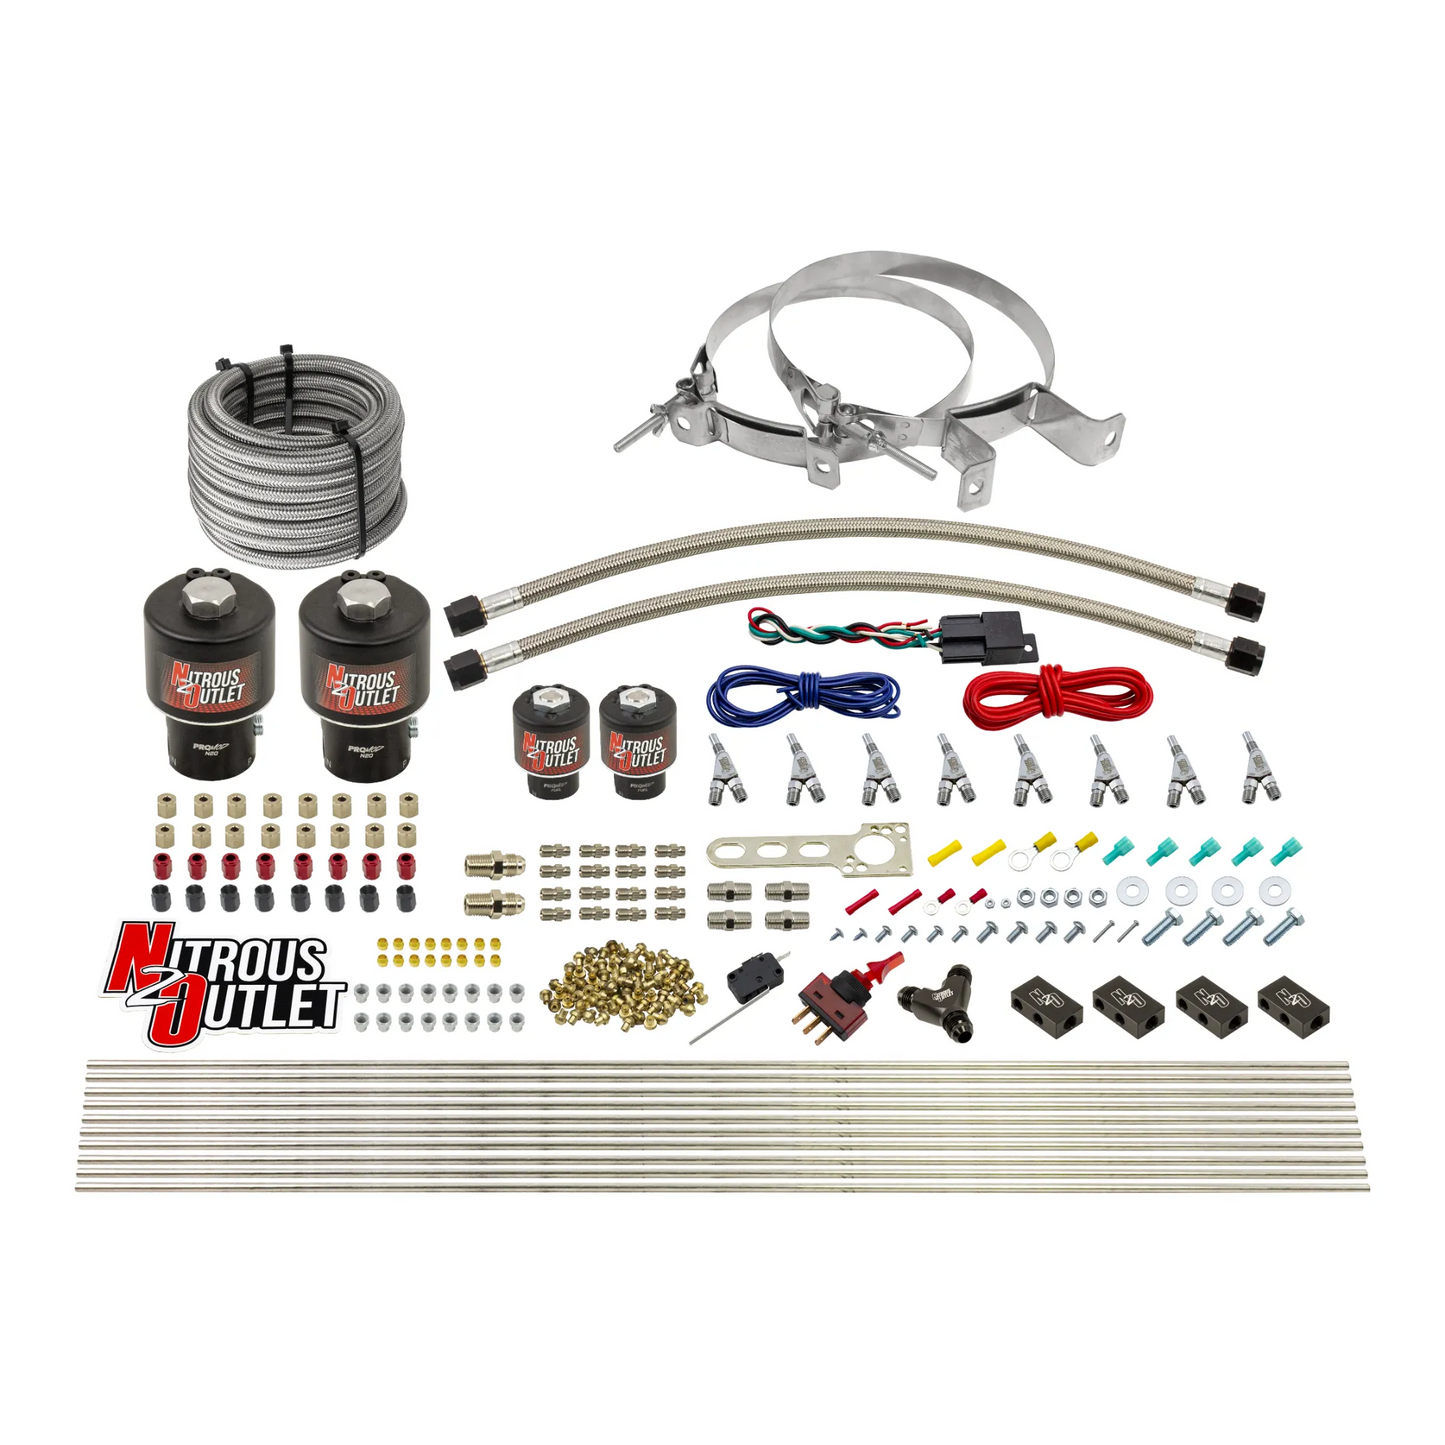 8 Cylinder Single Stage Direct Port Nitrous System - .178 Nitrous/.177 Fuel Solenoids - Alcohol - Straight Blow Through Nozzles